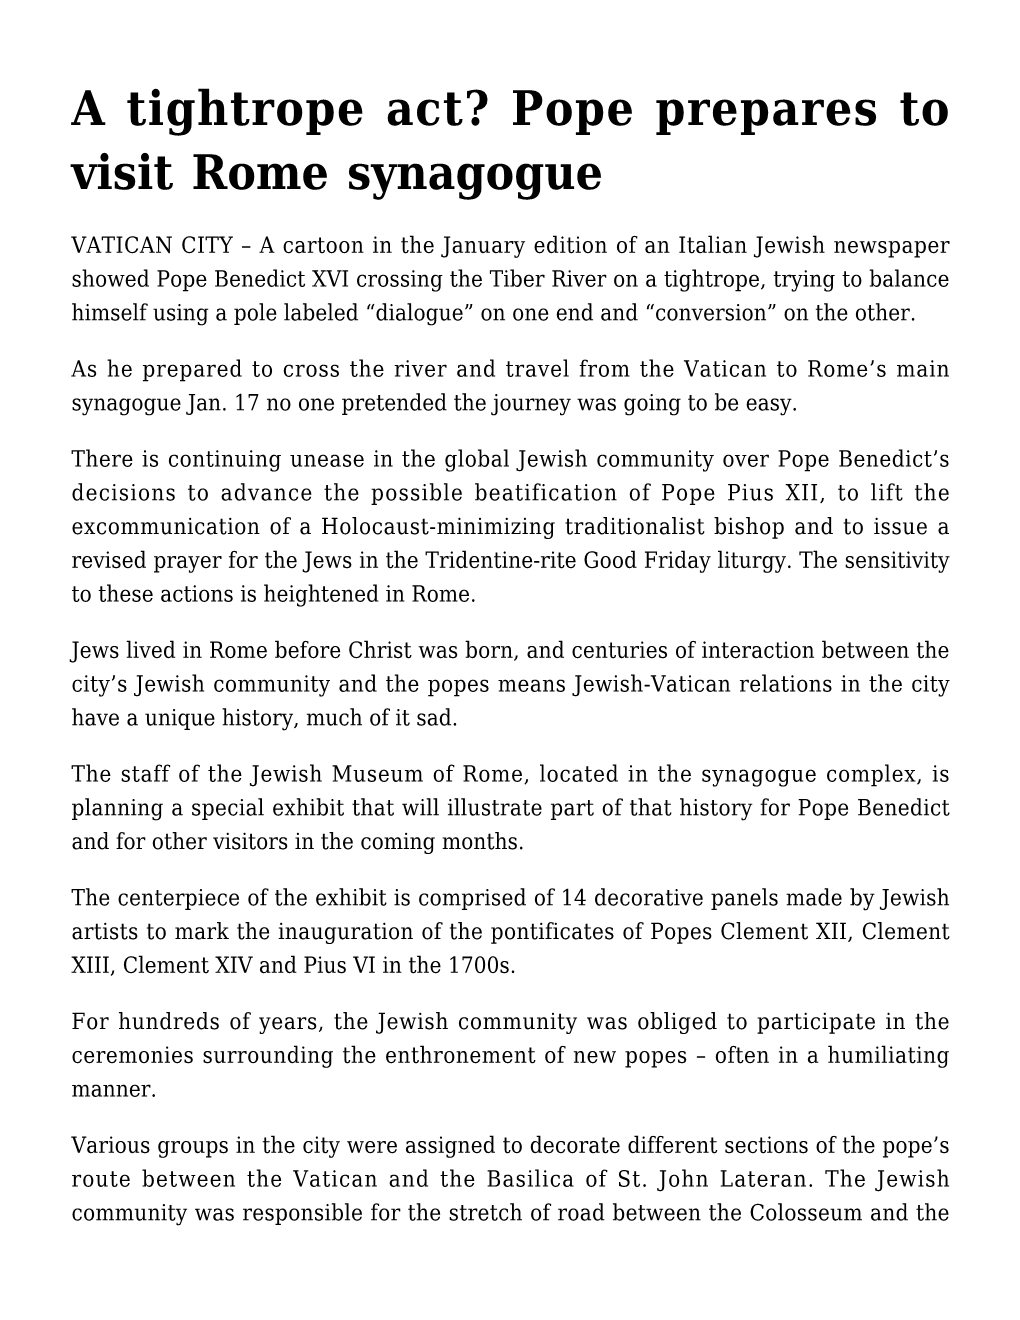 A Tightrope Act? Pope Prepares to Visit Rome Synagogue